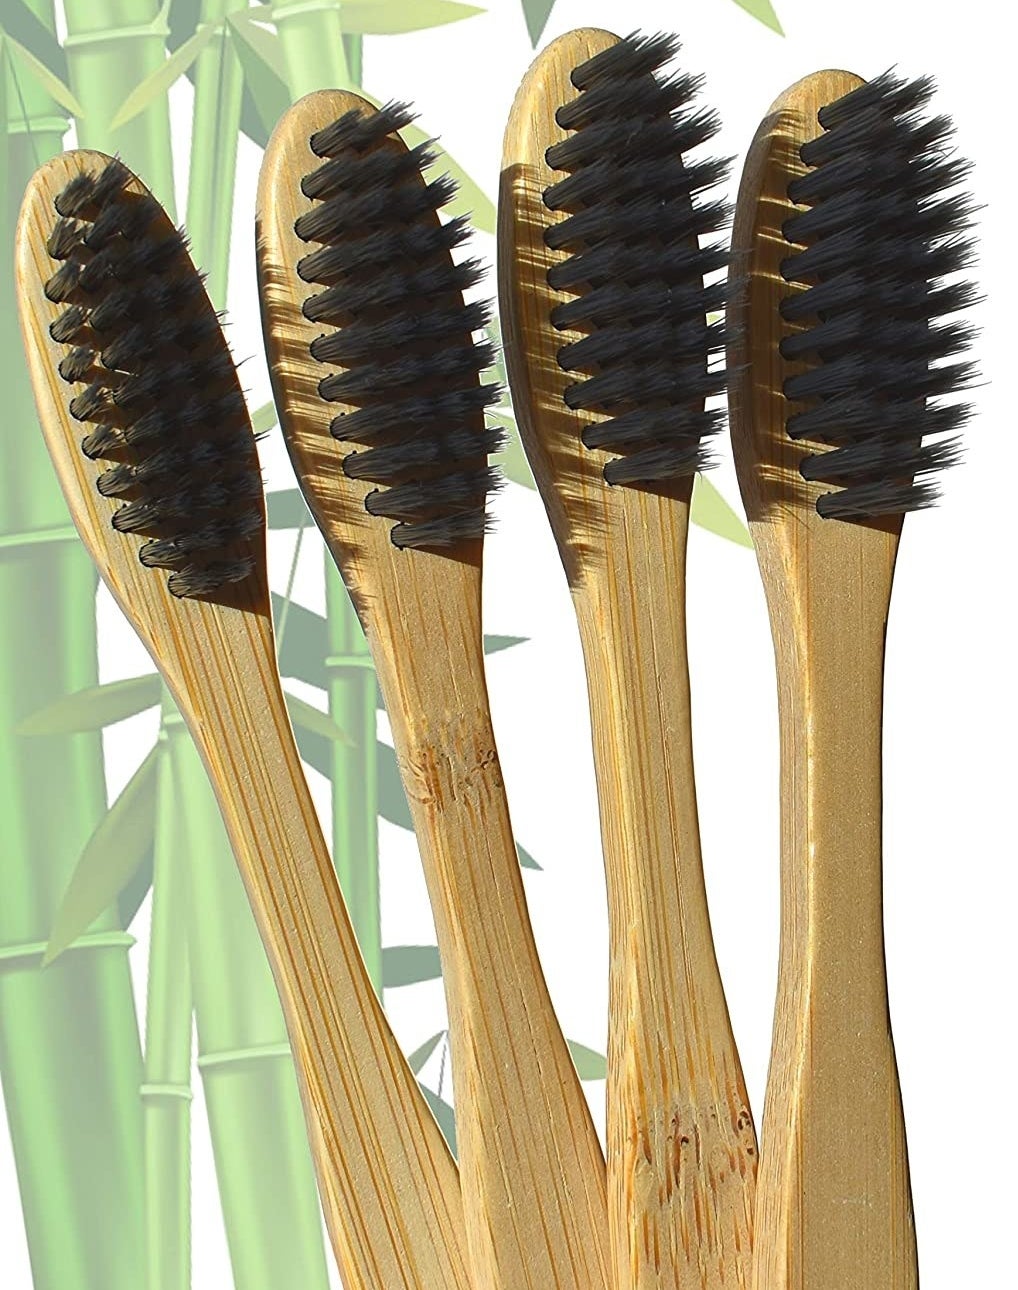 Four bamboo toothbrushes against a bamboo backdrop 